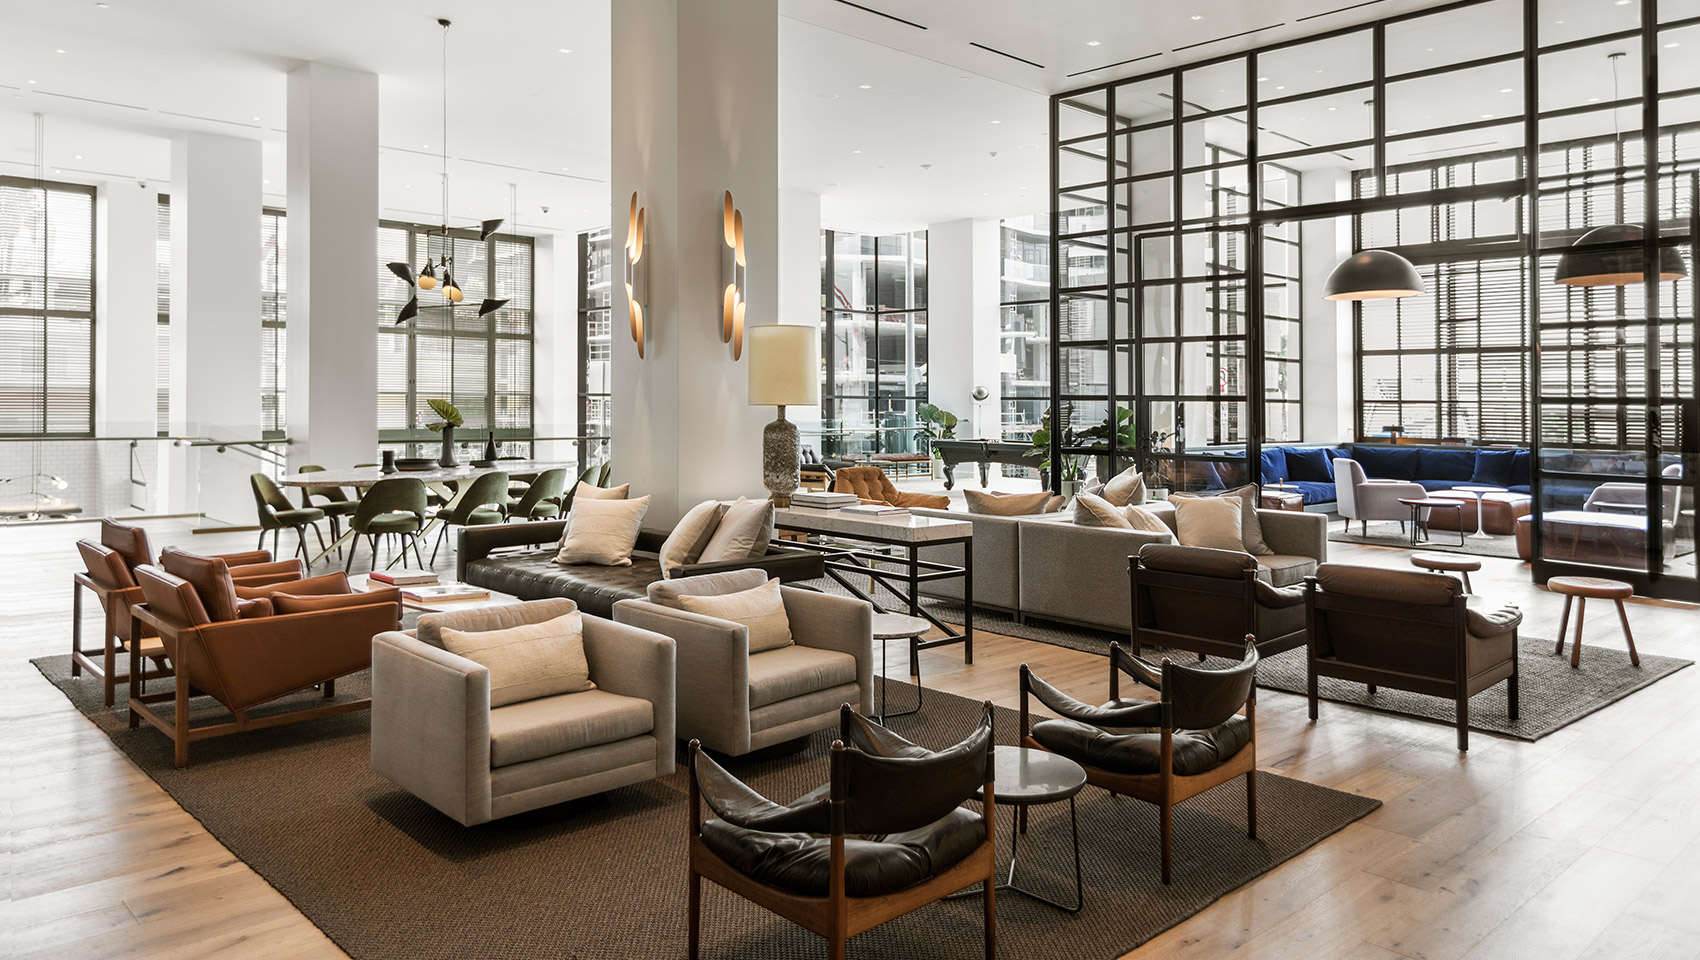 The Everly lobby with seating and natural light